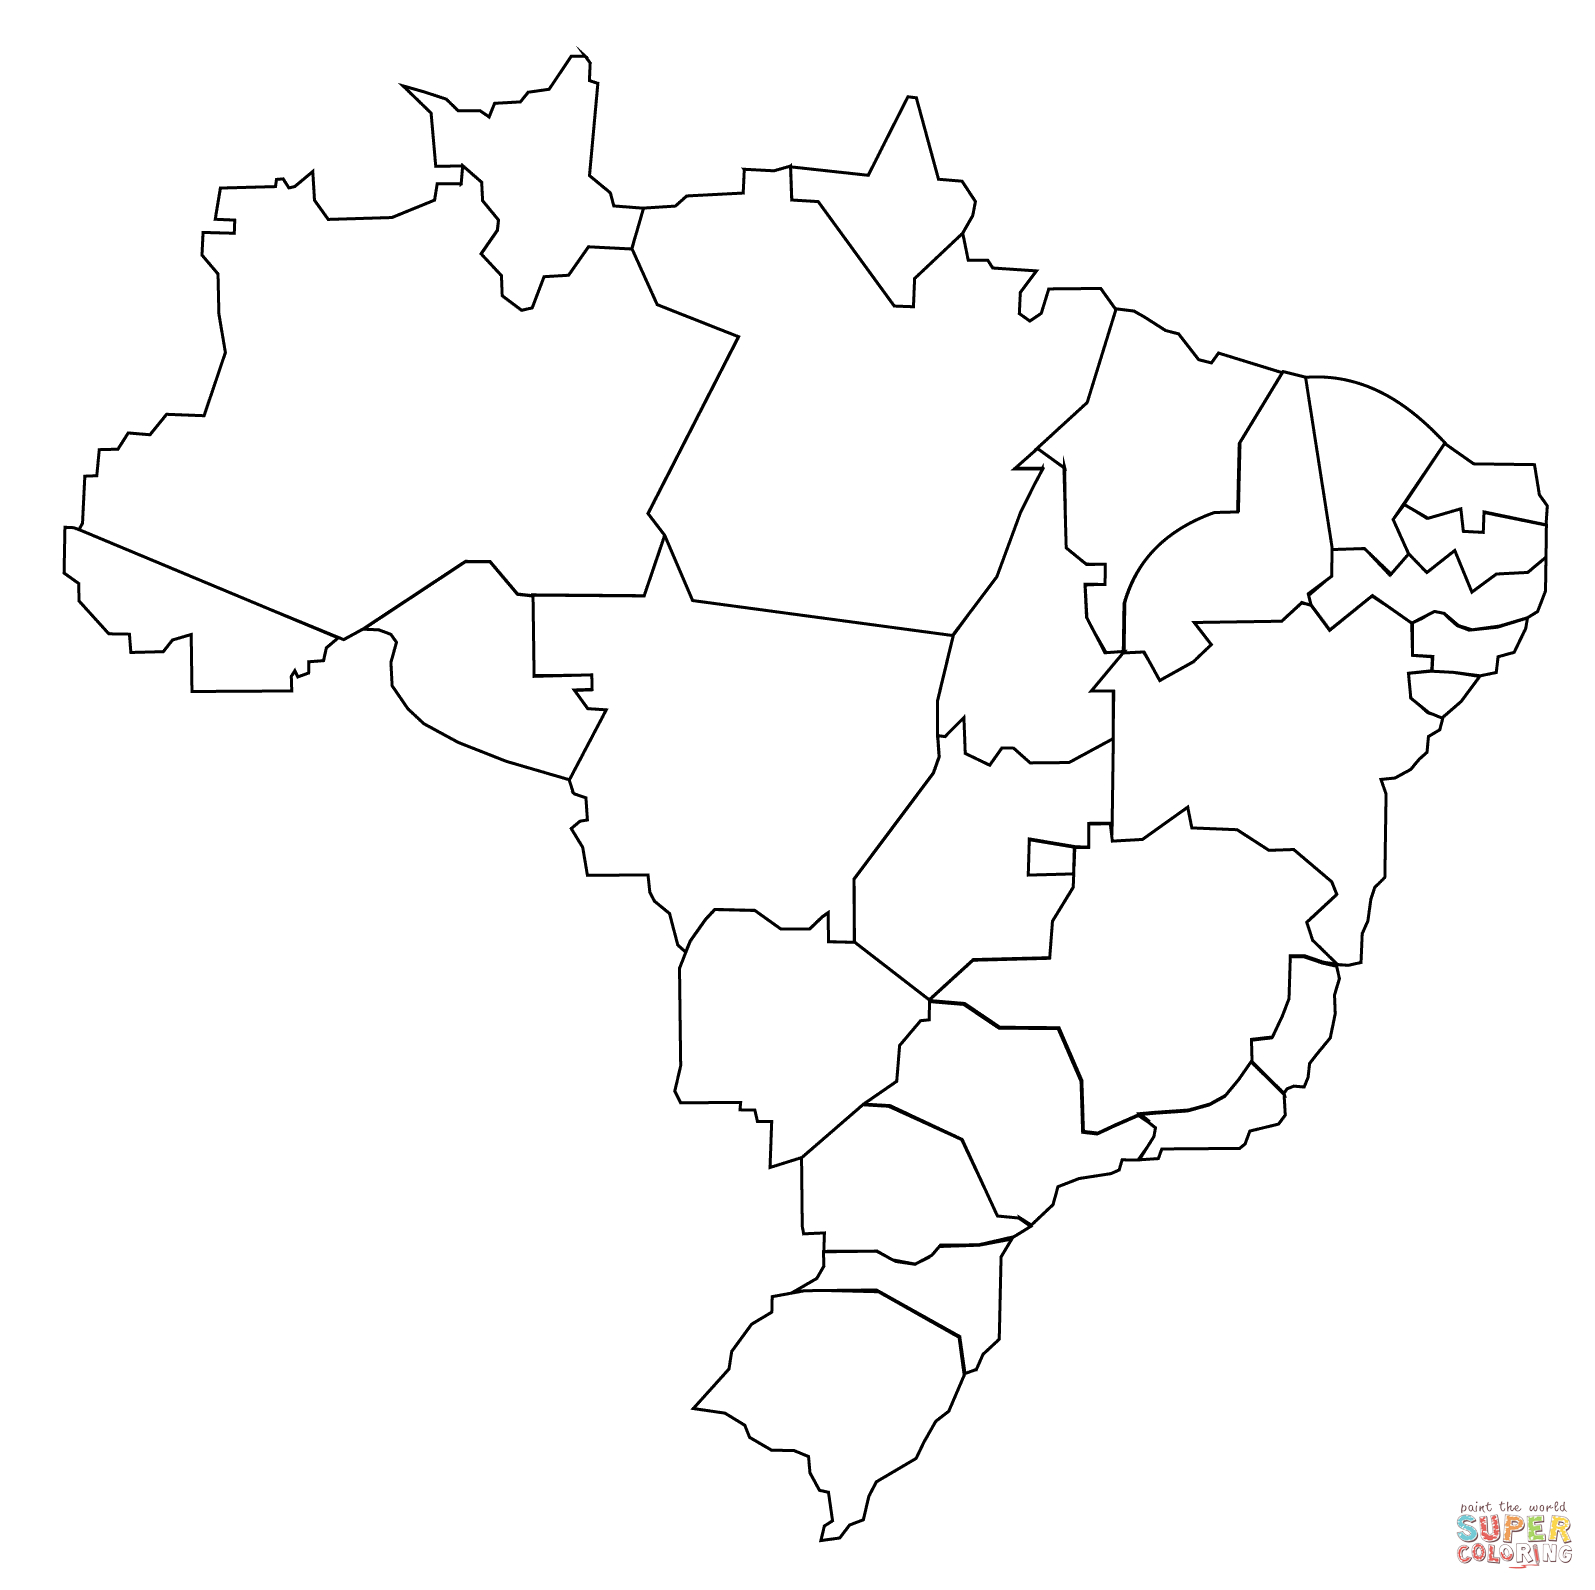 Outline Map Of Brazil With States Coloring Page | Free Printable - Free Printable Map Of Brazil